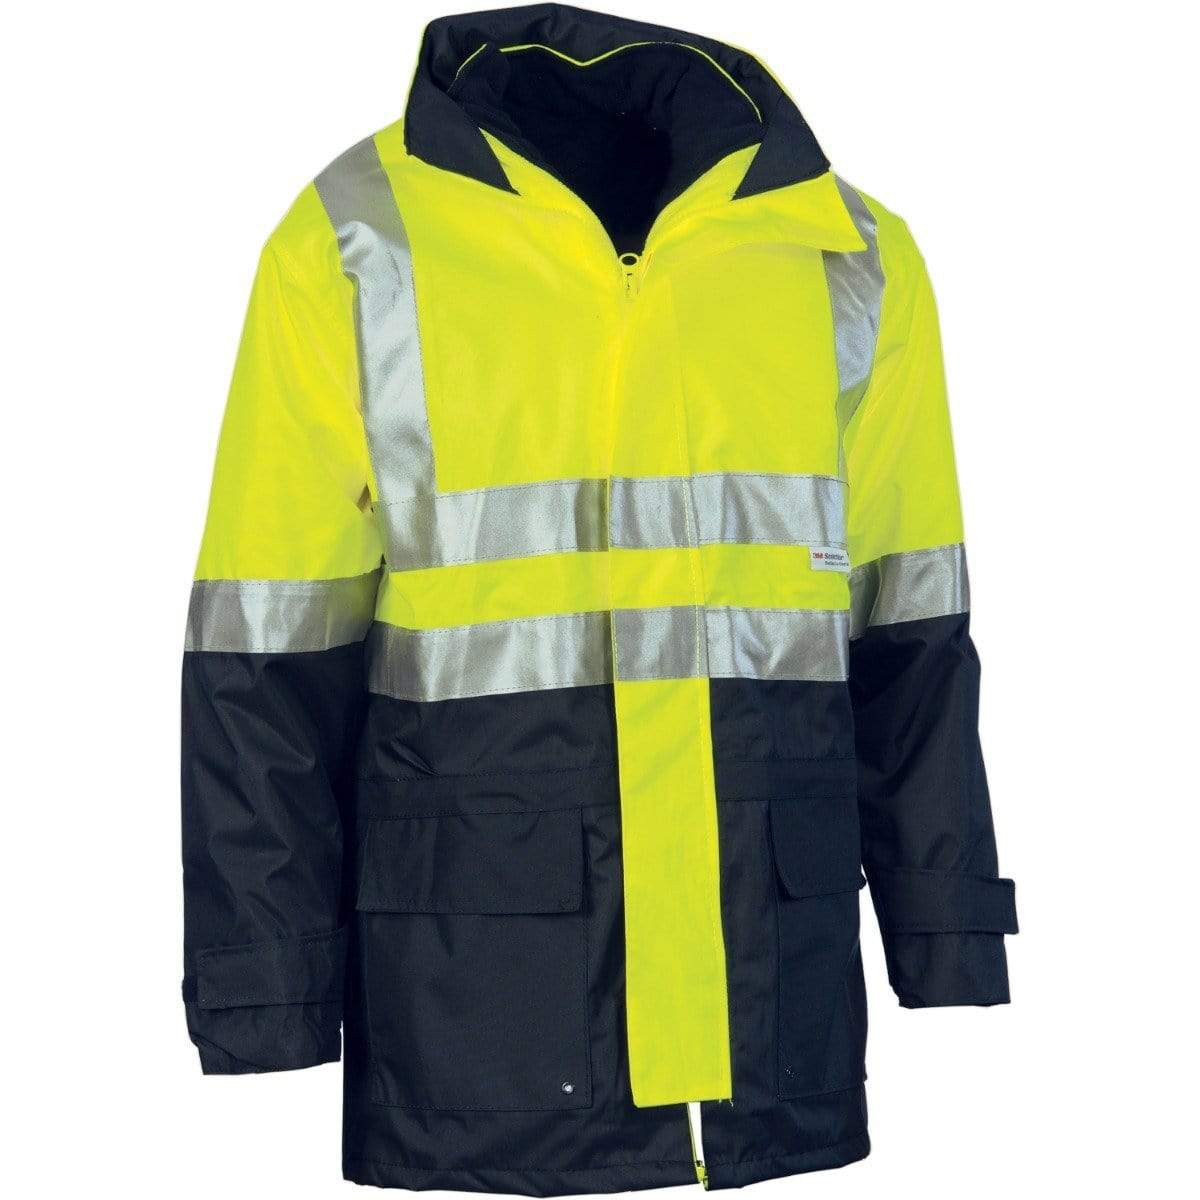 DNC Workwear Work Wear Yellow/Navy / S DNC WORKWEAR 4-in-1 Hi-Vis Two-Tone Breathable Jacket with Vest and 3M Reflective Tape 3864